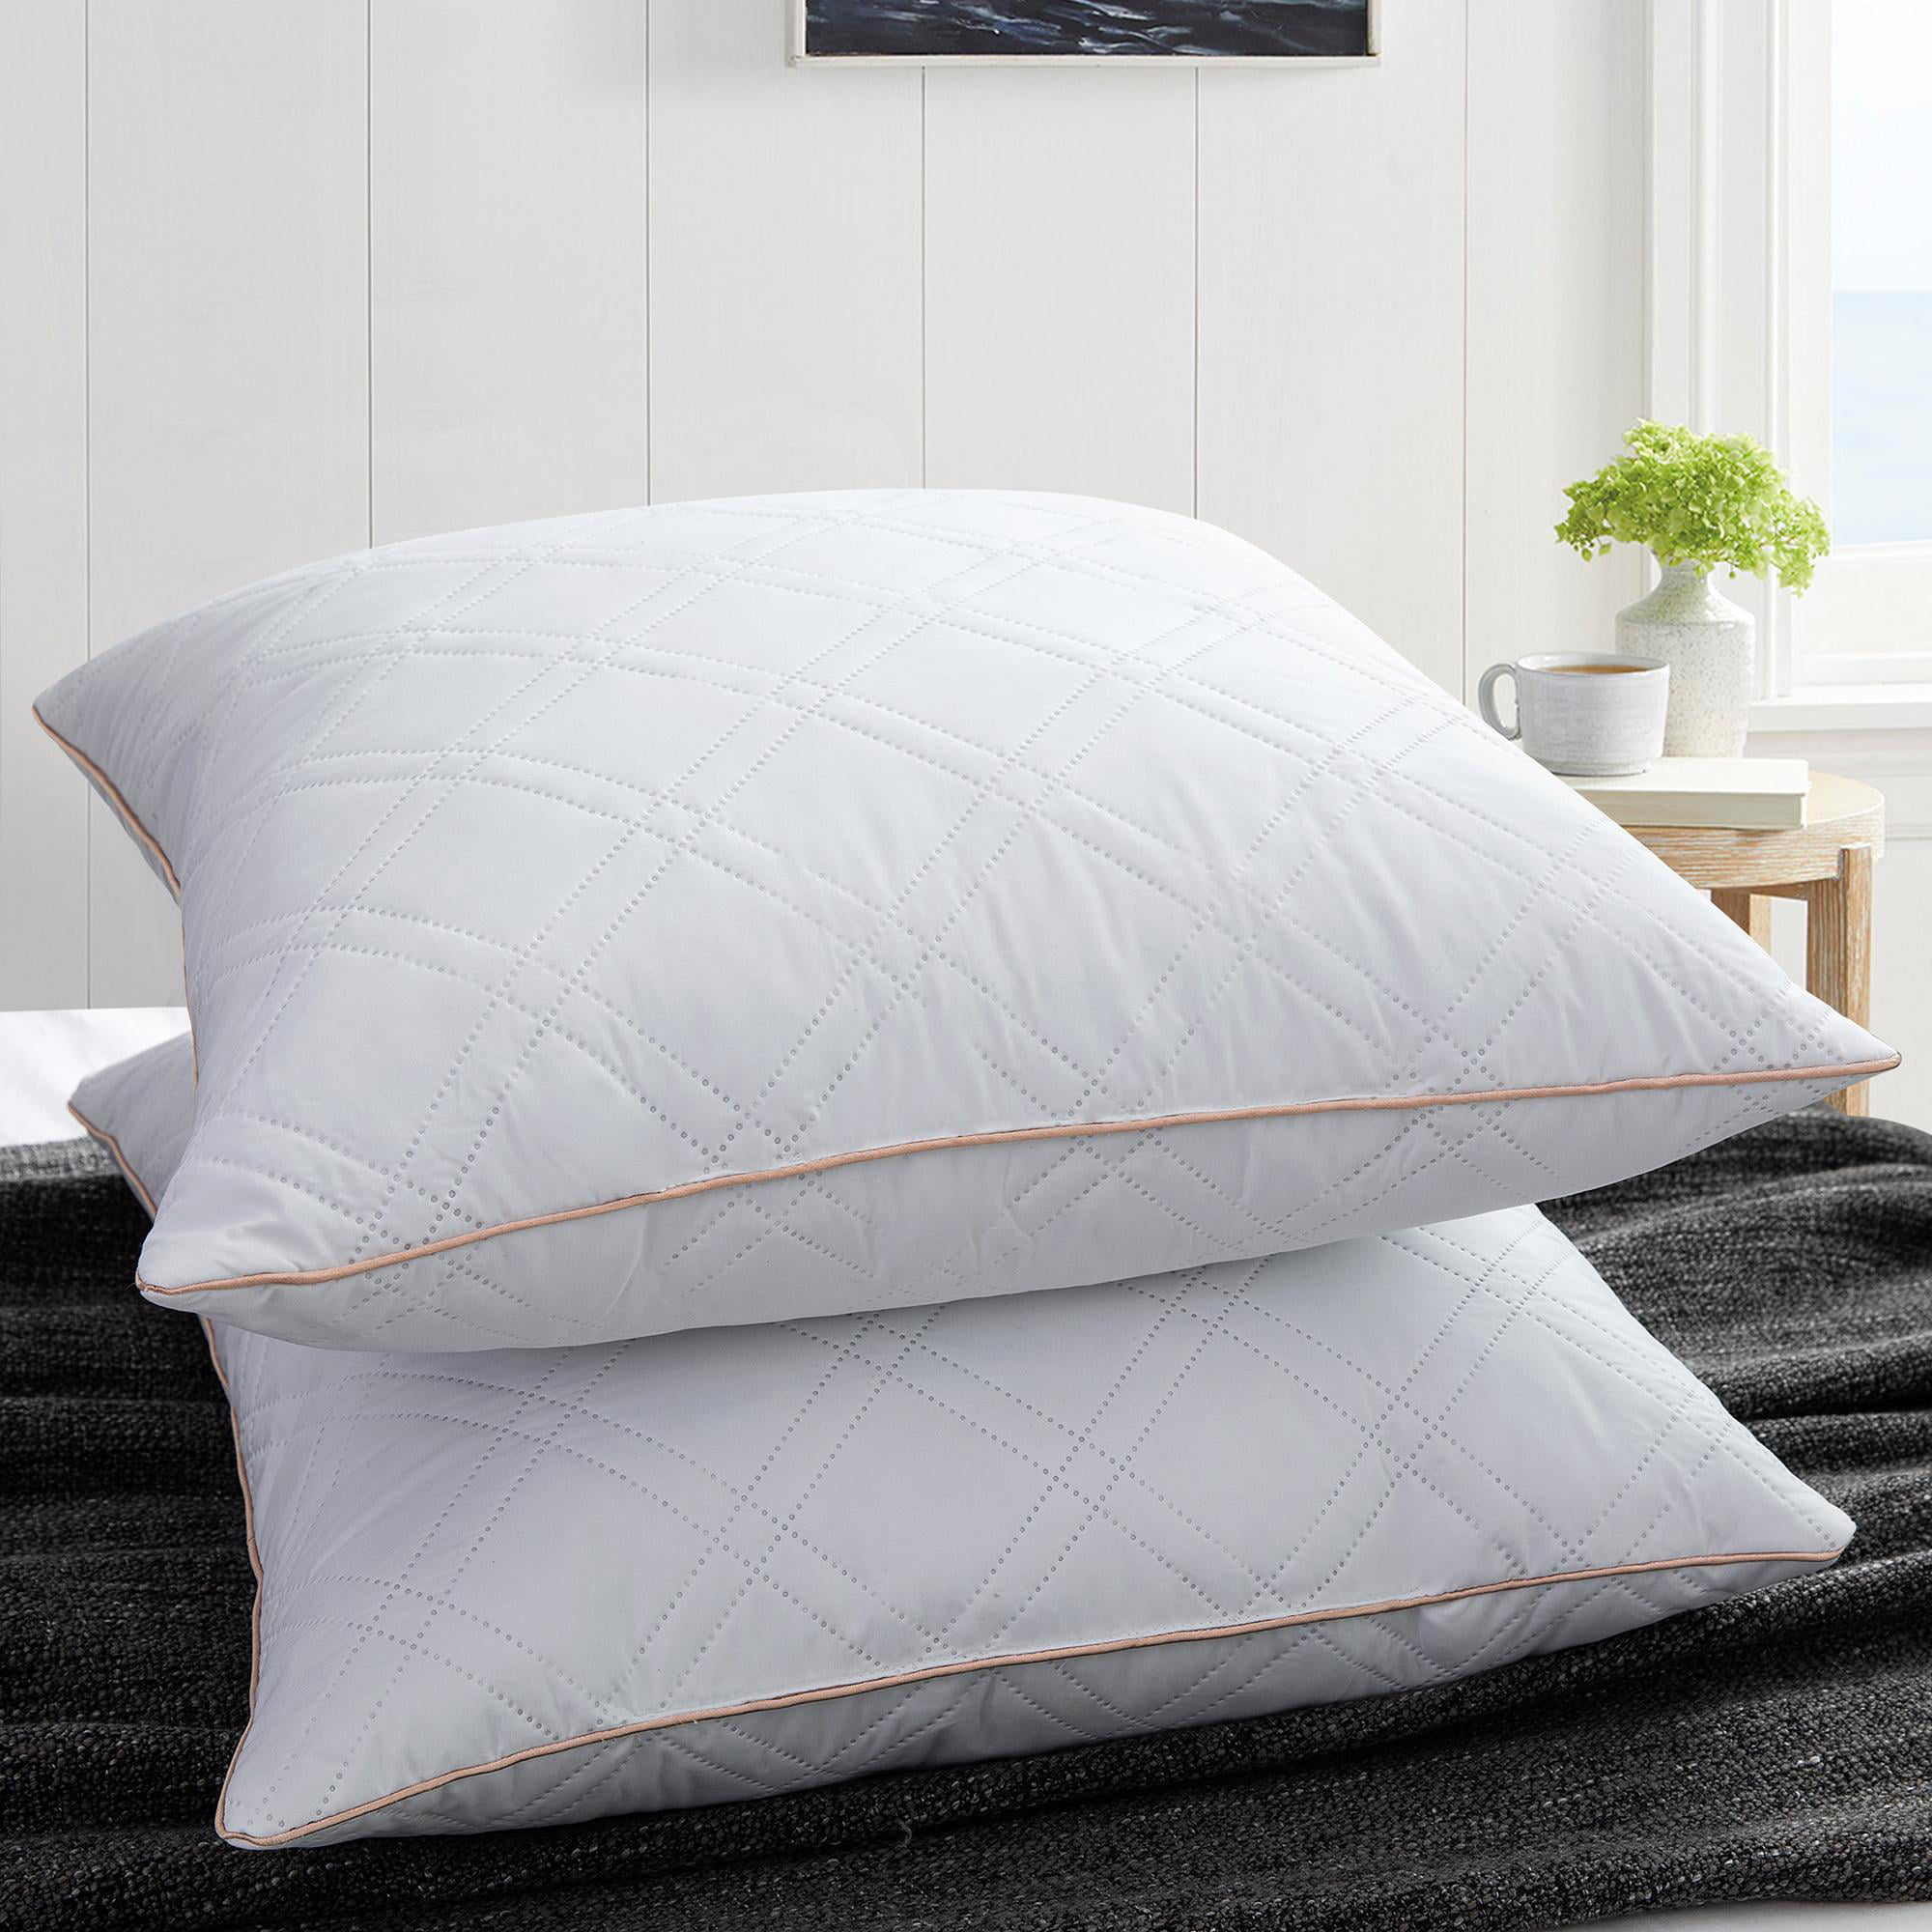 Feather Down Blend Bed Pillows 100% Cotton Cover Sleeping Premium Pillows Insert 